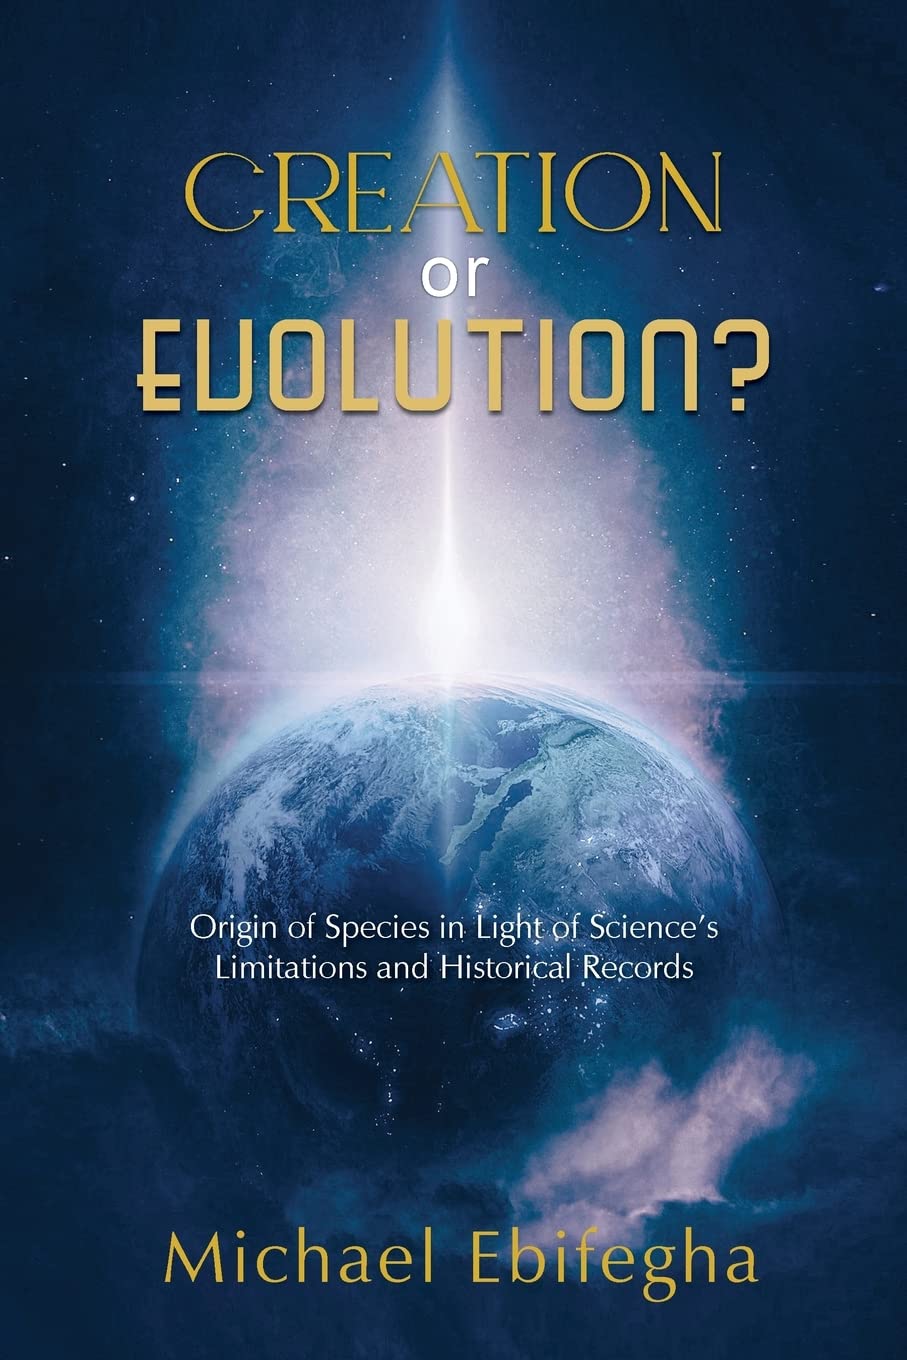 Creation or Evolution? Origin of Species in Light of Science’s Limitations and Historical Records